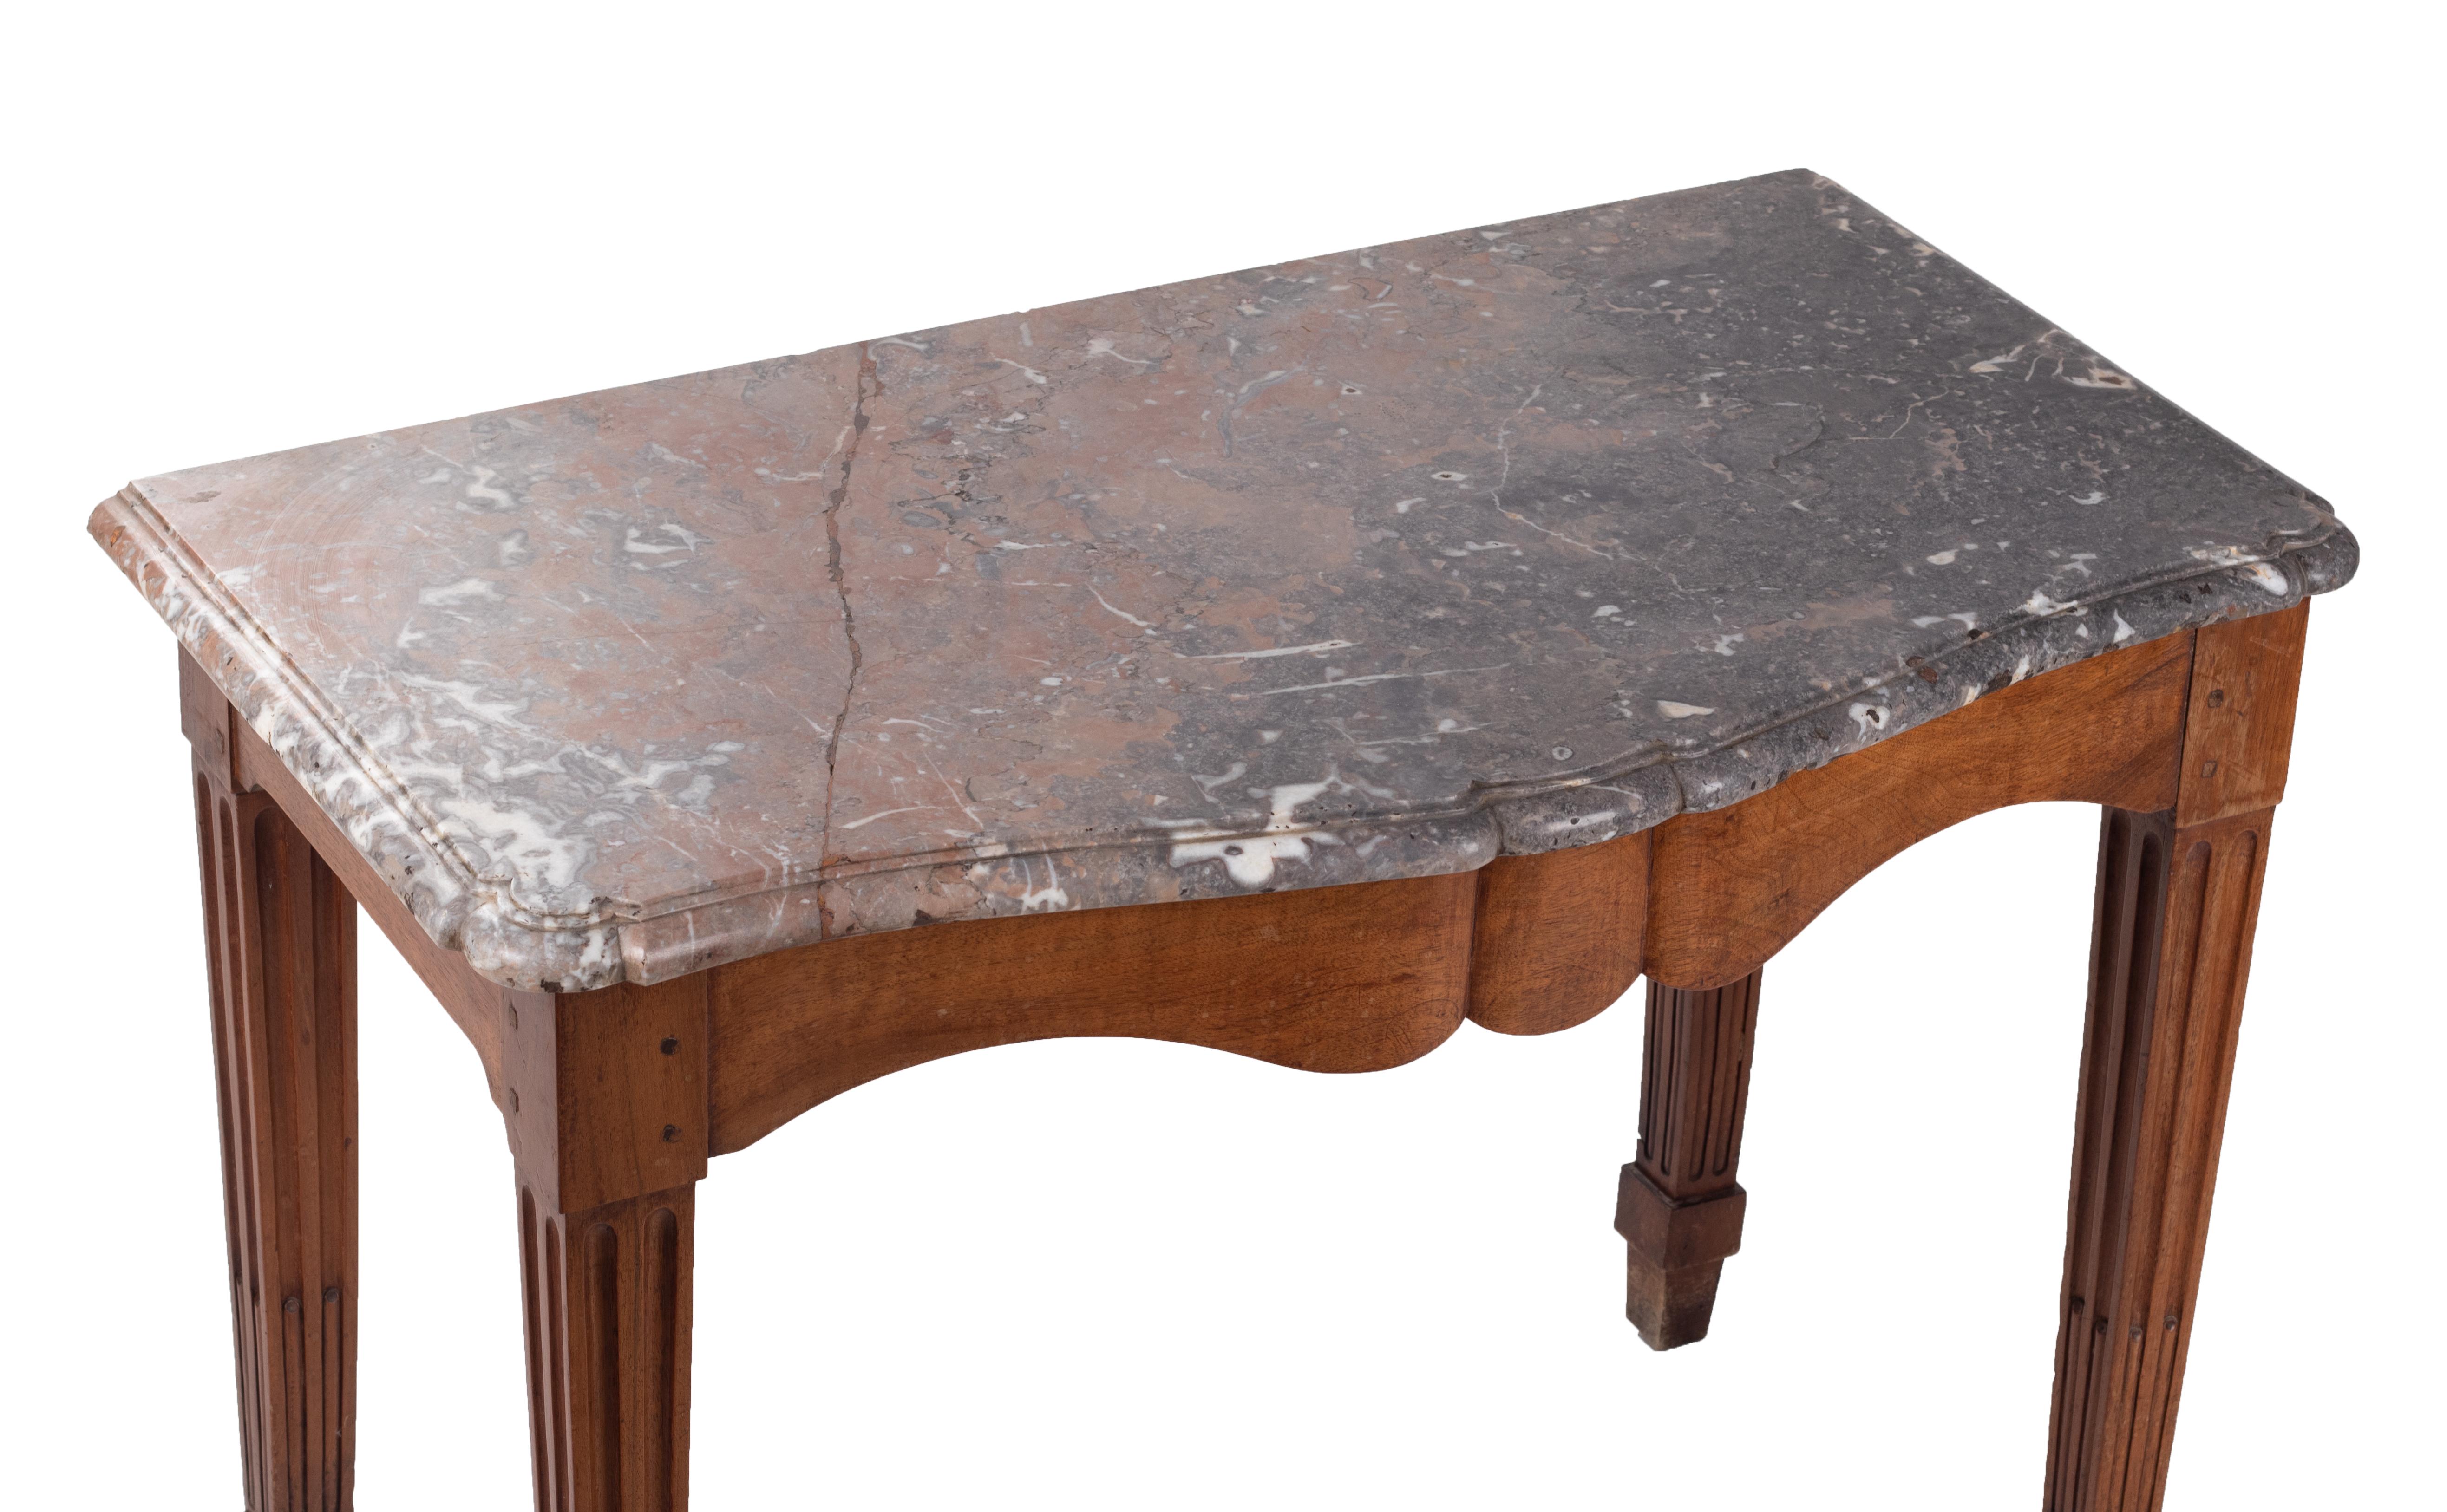 18th century French wooden console table with marble top.